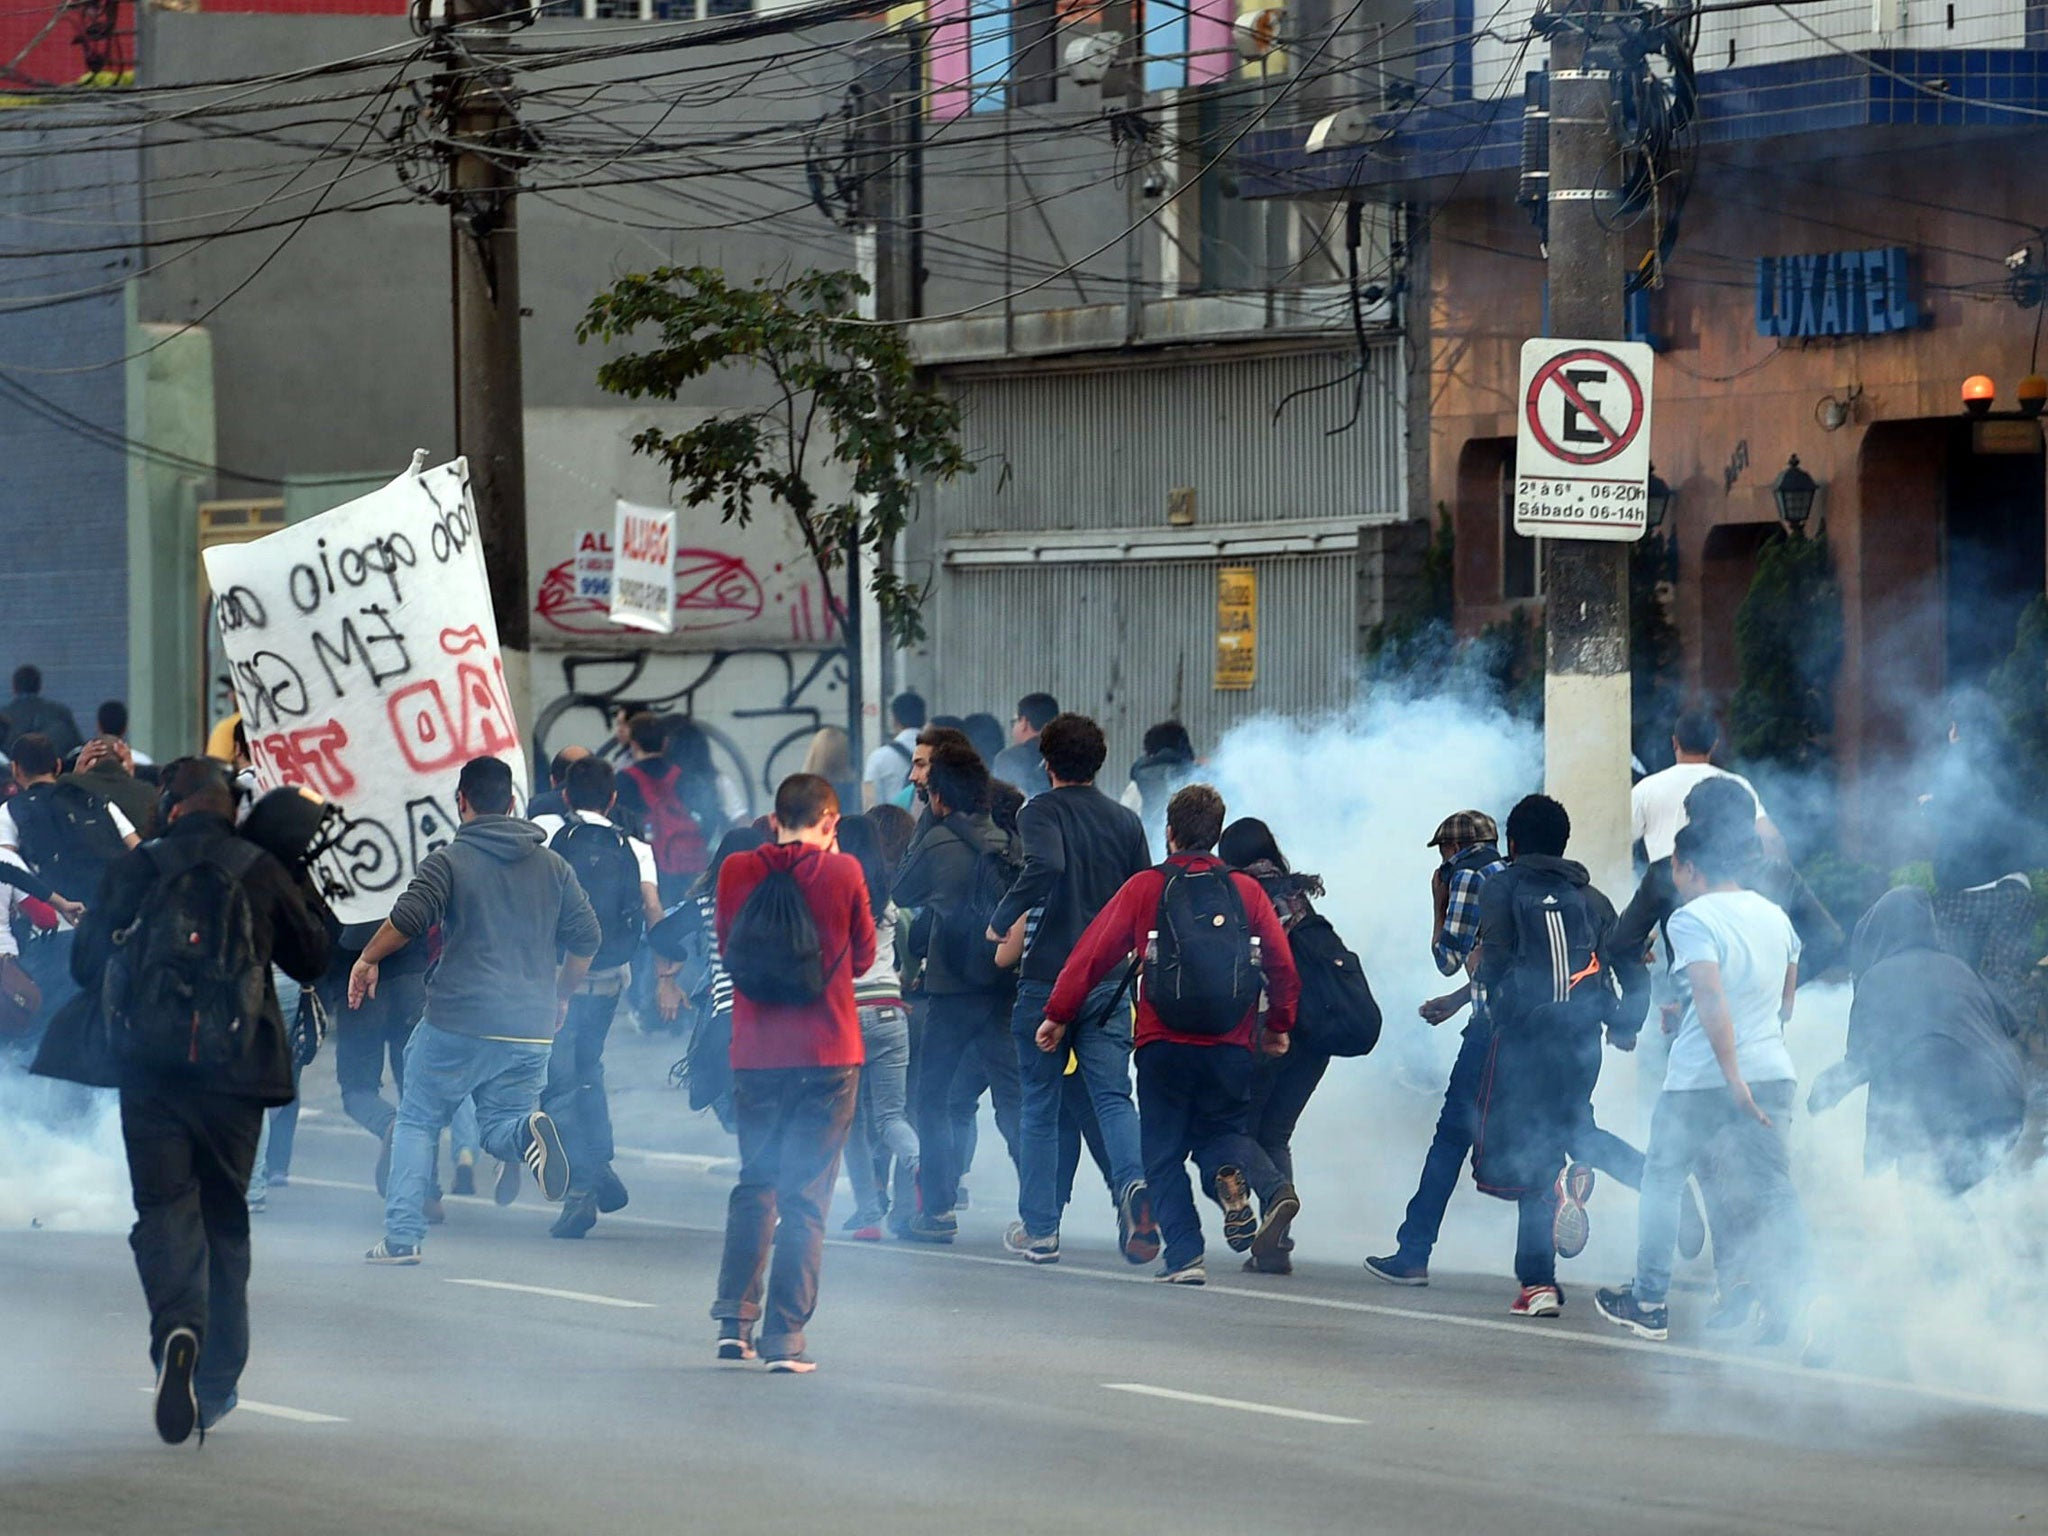 Striking subway workers and members of the MTST (Homeless Workers' Movement), are dispersed with tear gas by police forces as they demonstrate in Sao Paulo